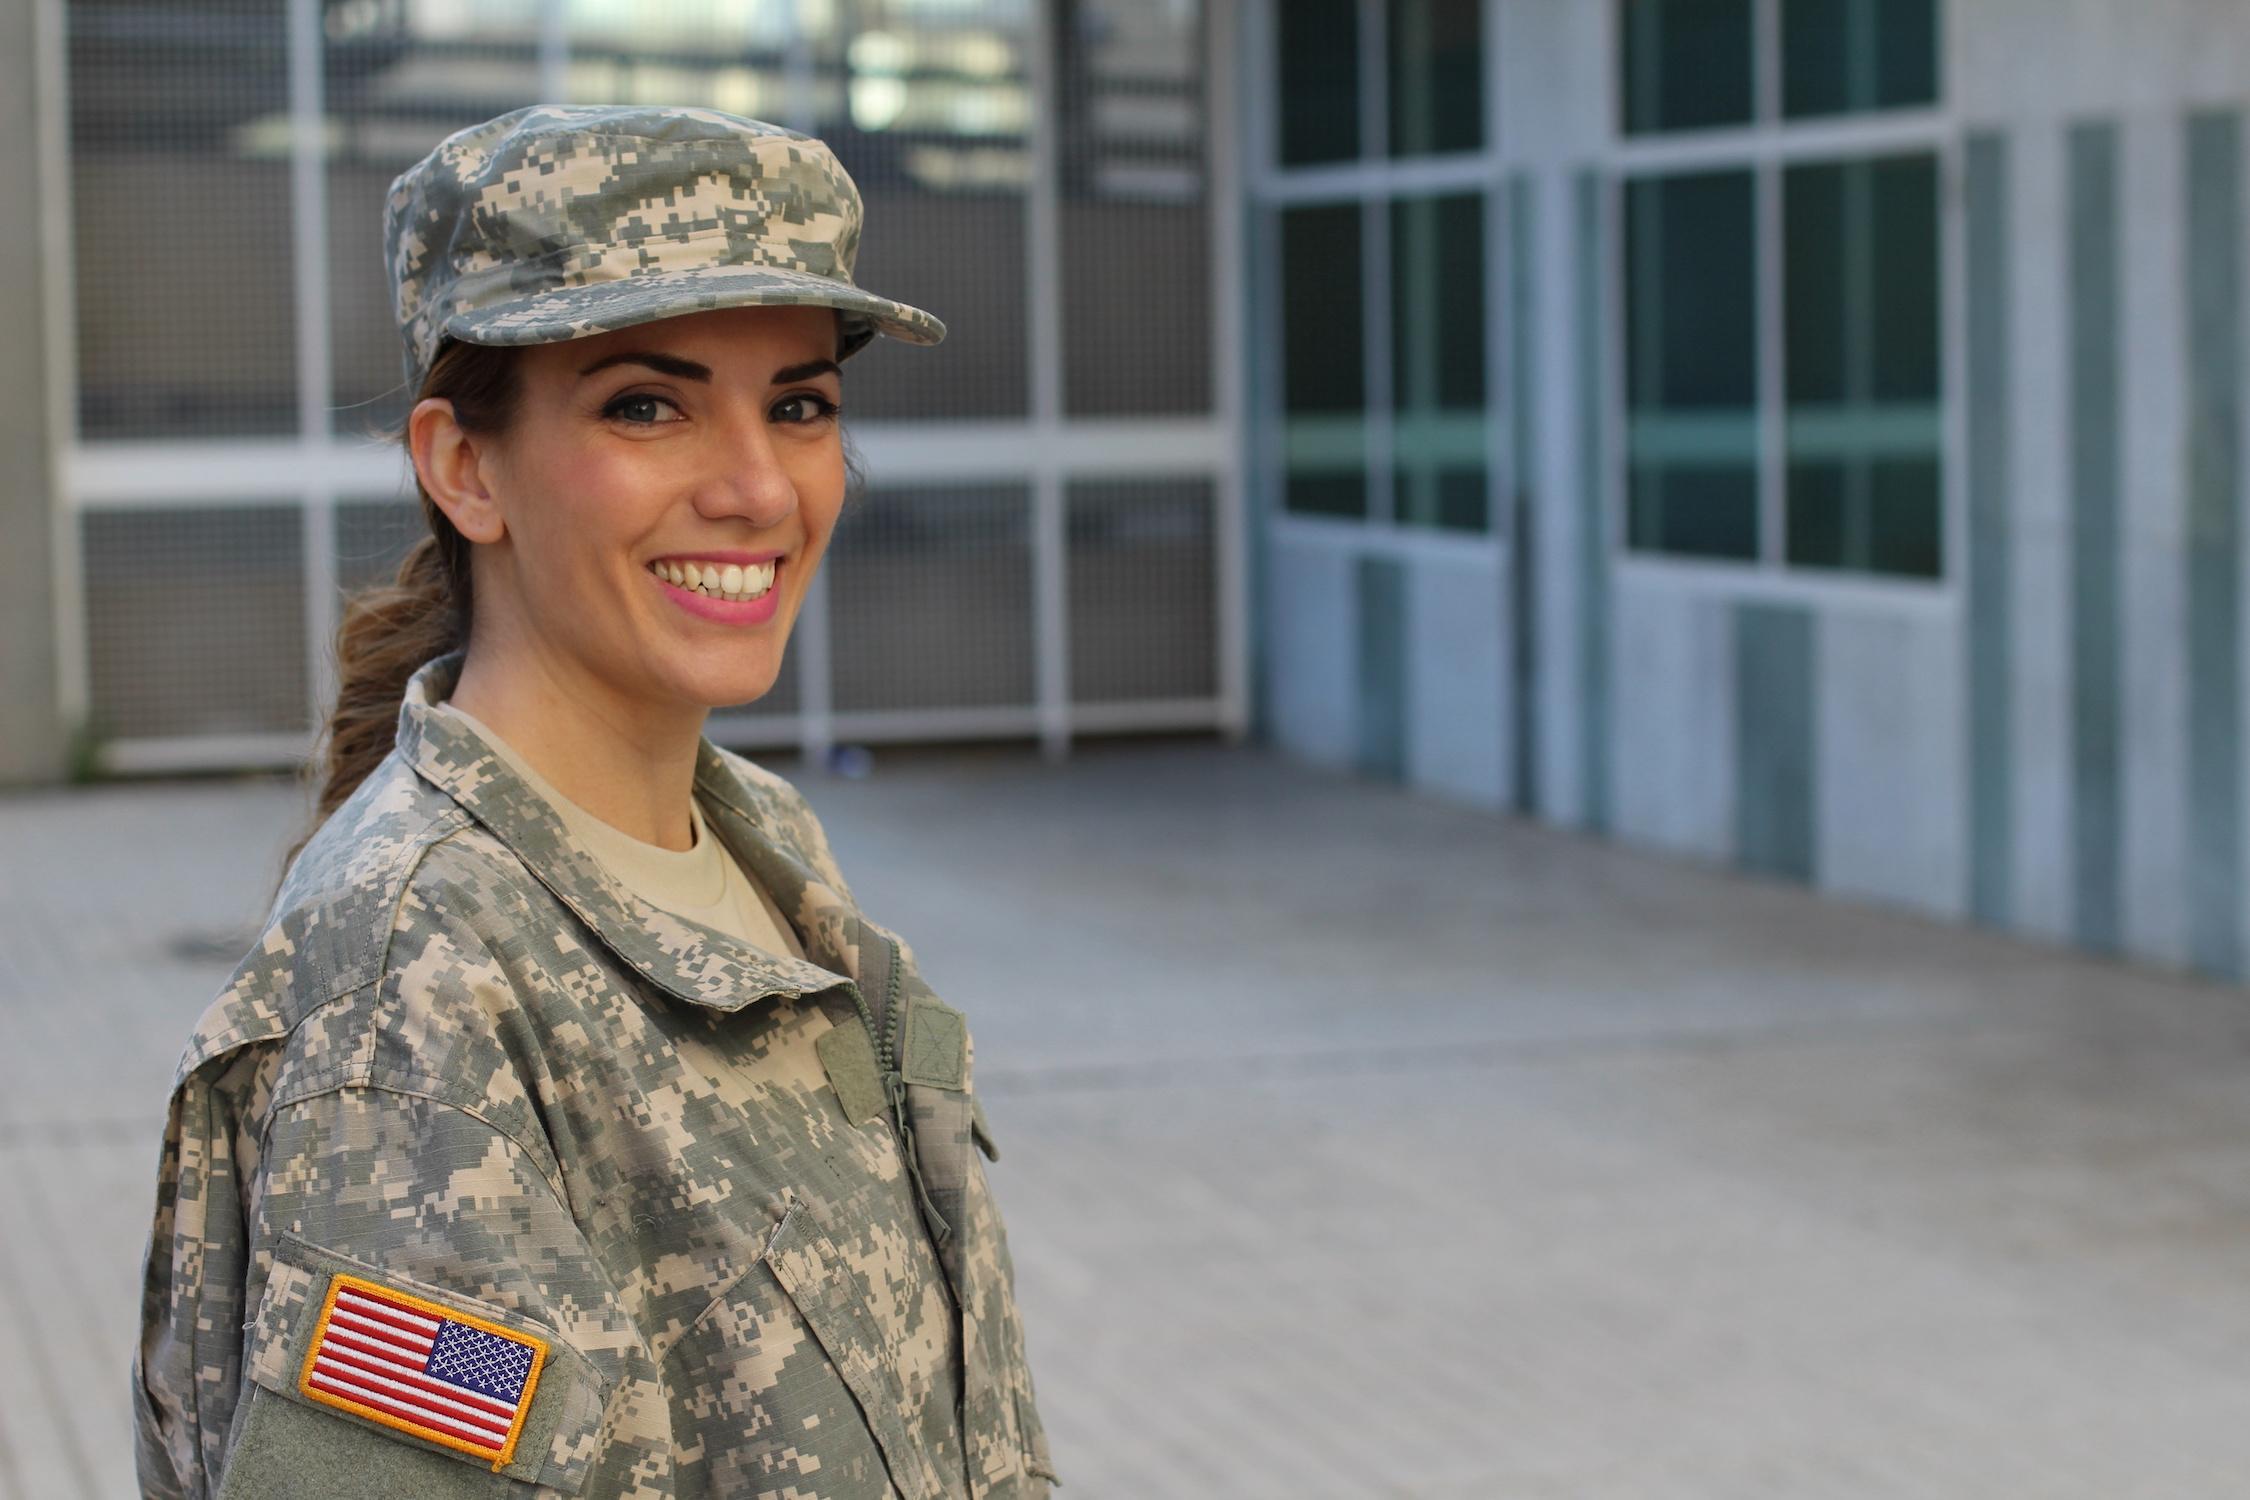 A smiling SC service member stands in the courtyard of a teaching university building.